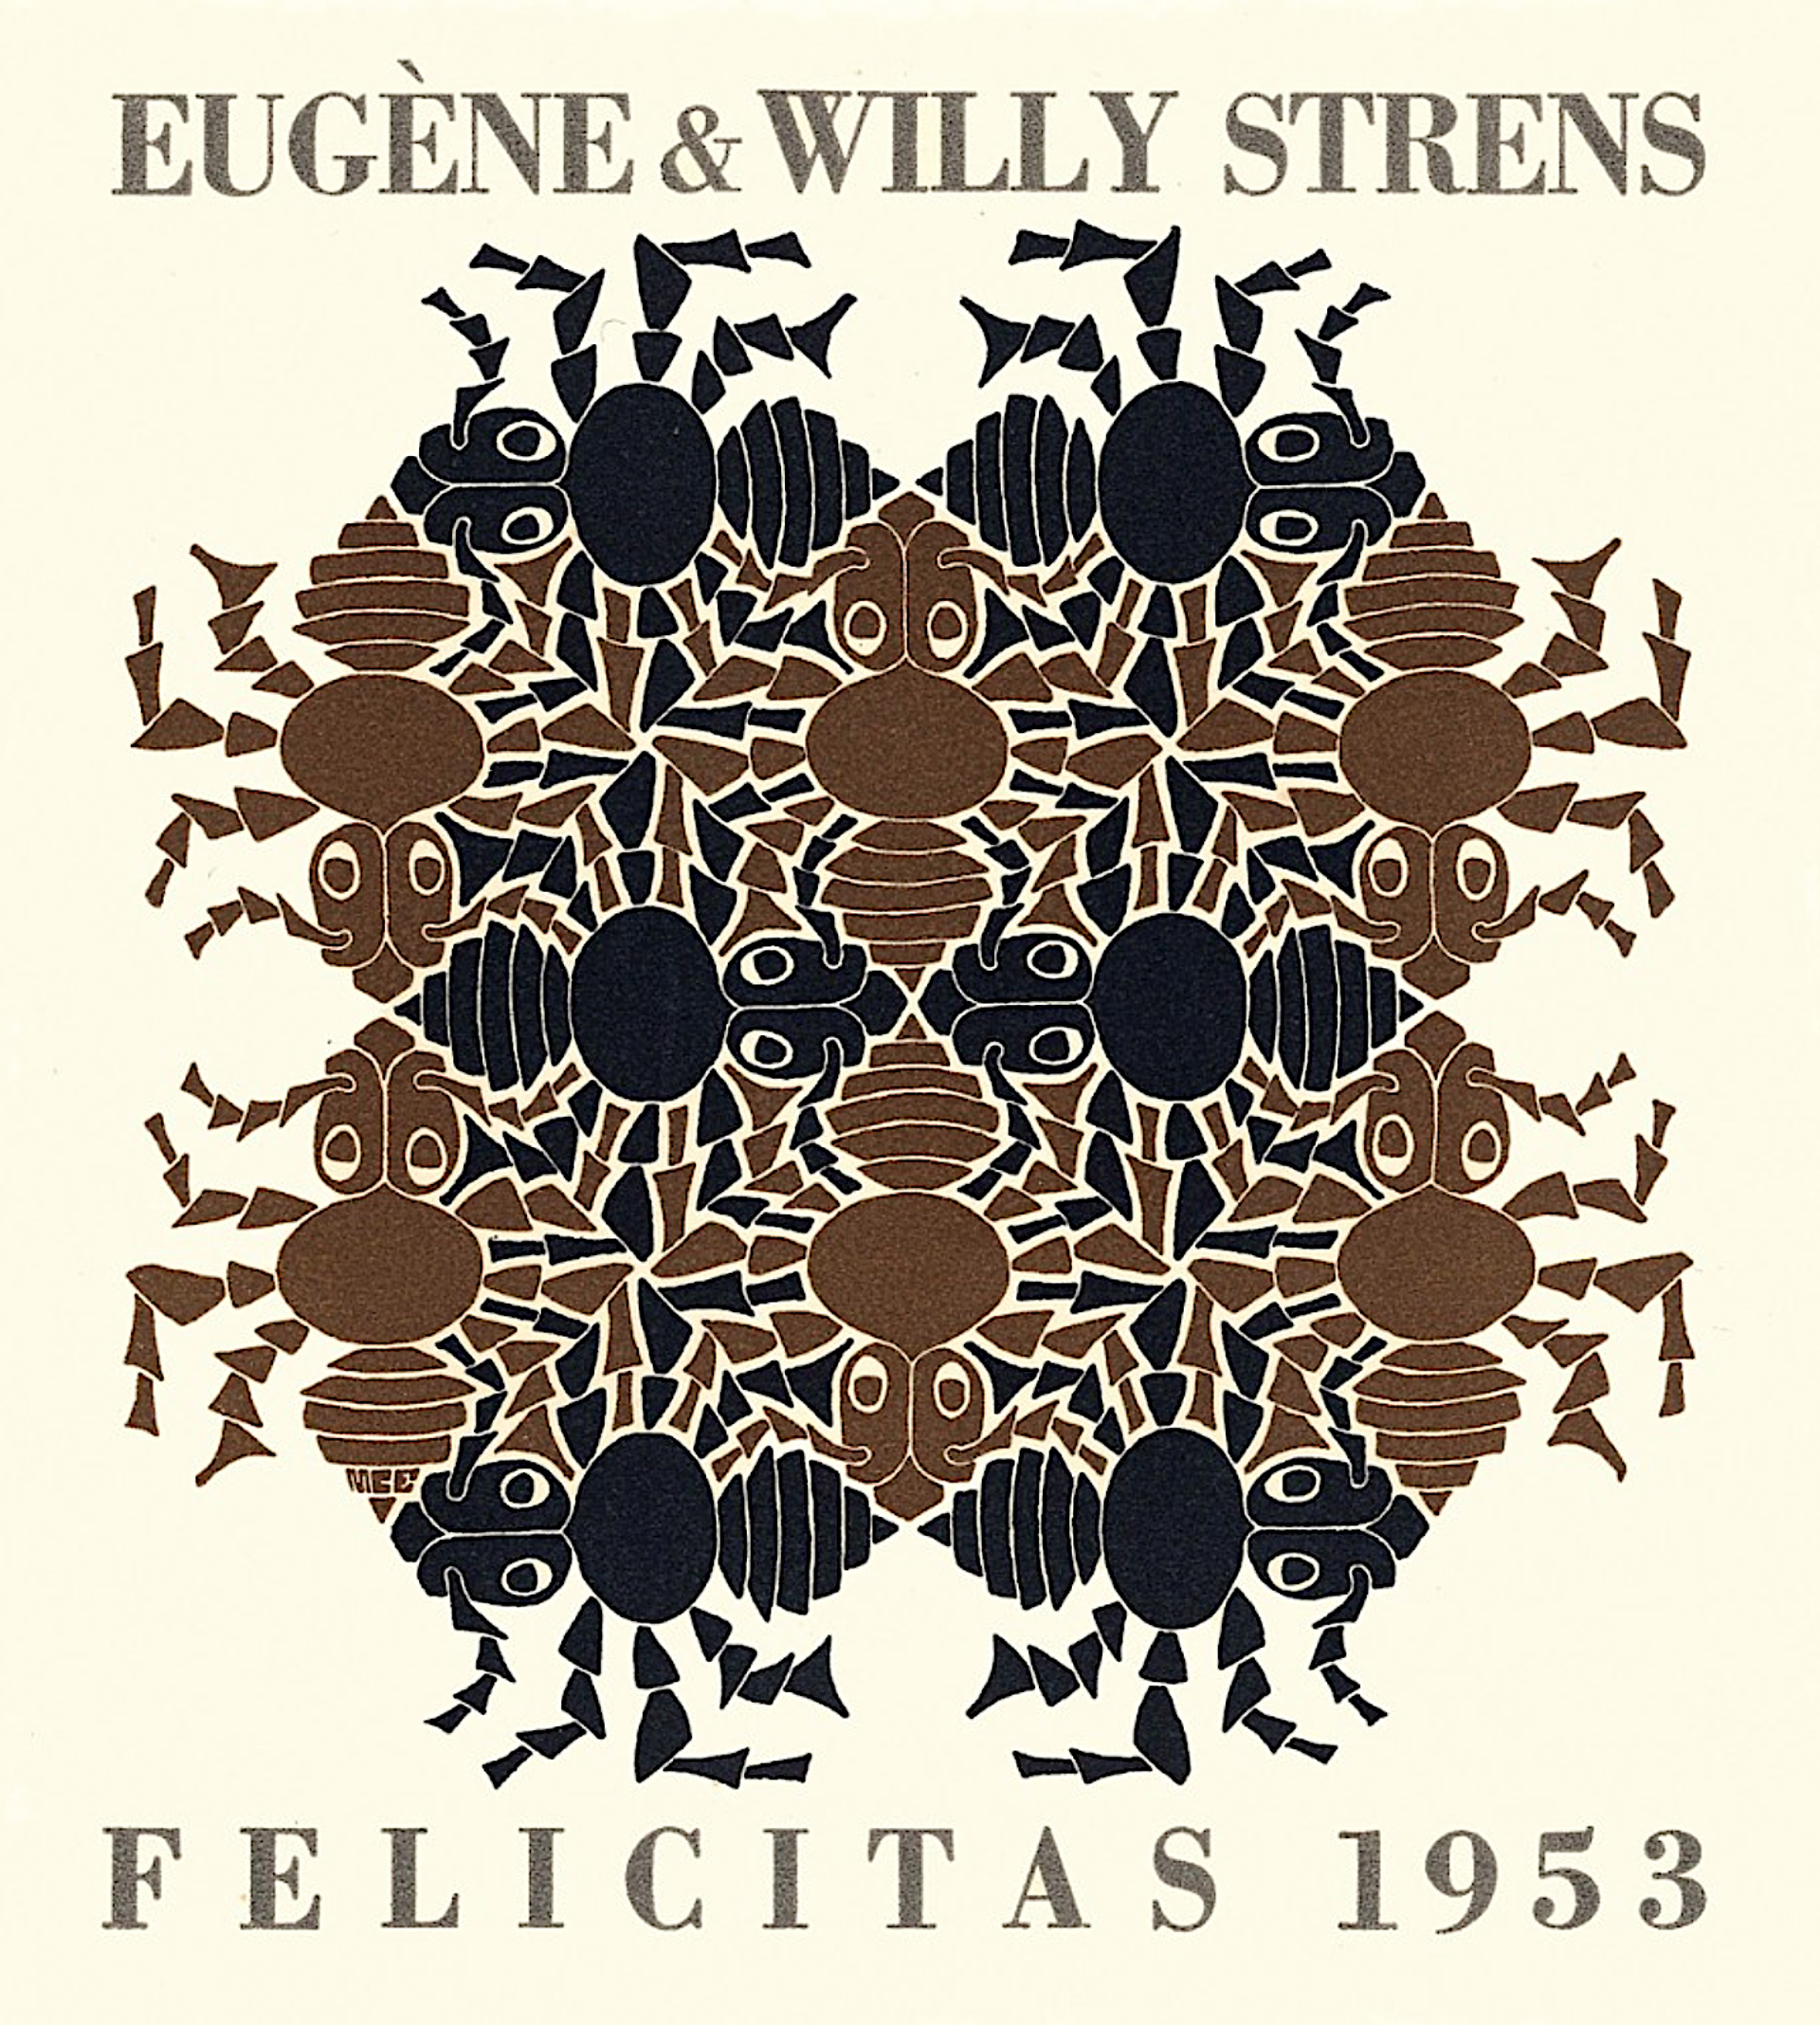 Earth - Strens New Year's Greeting Card (Ants) by M.C. Escher